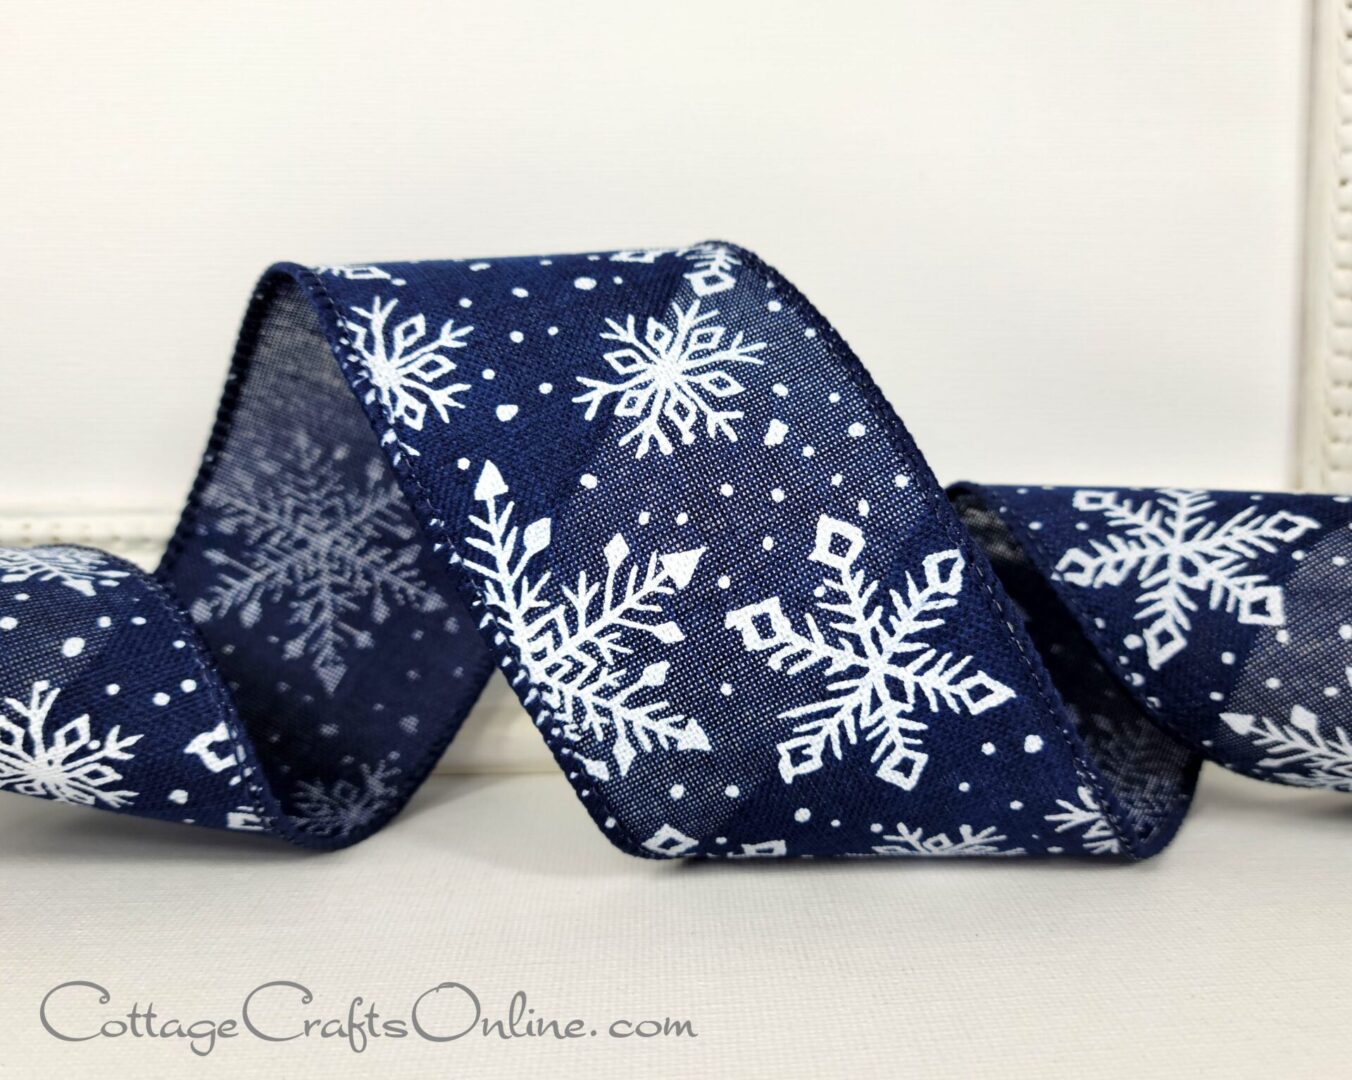 A close up of a ribbon with white snowflakes